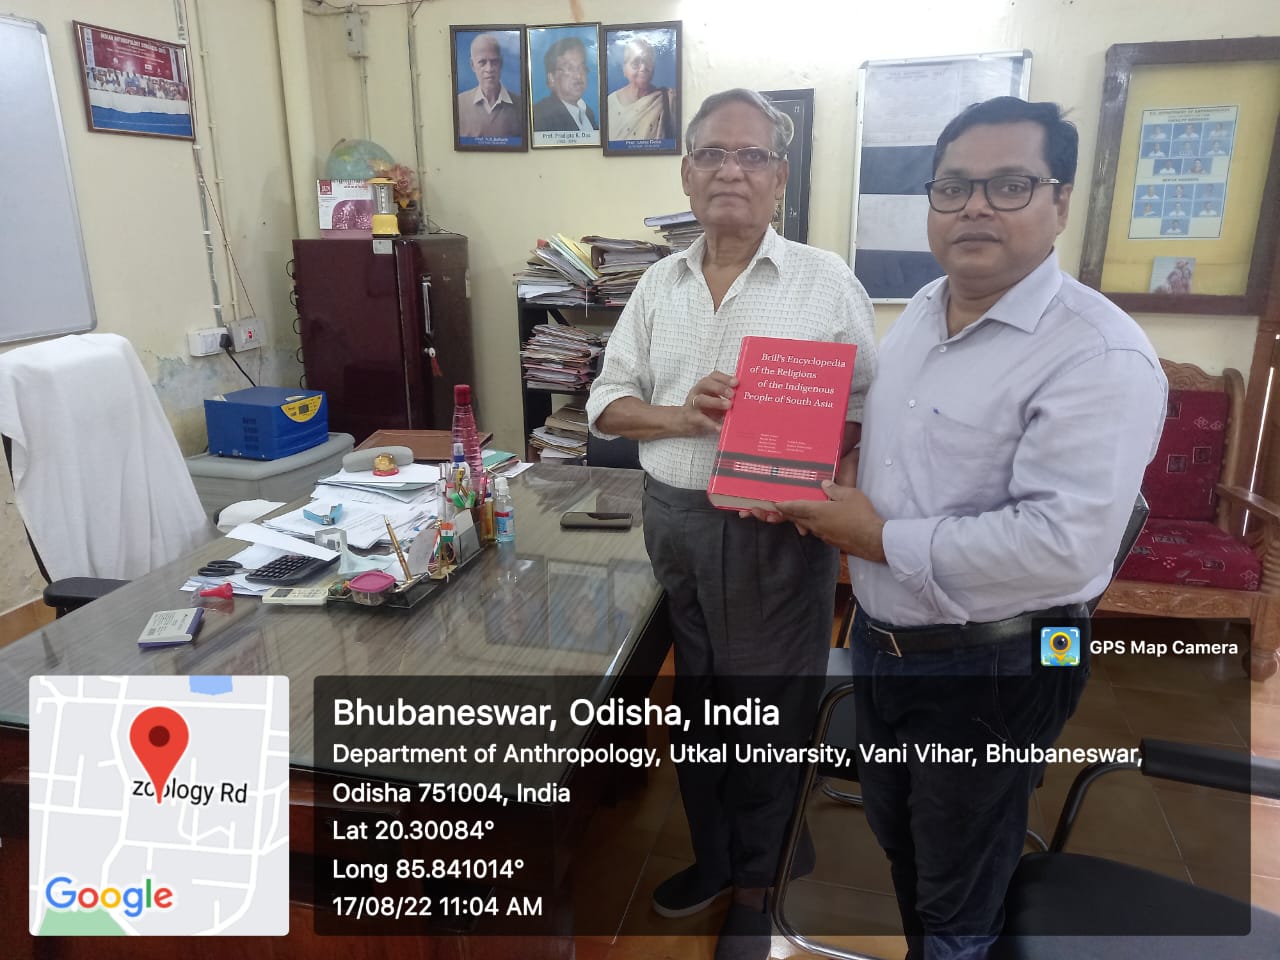 Prof. P.K. Nayak Donated a Book to the Seminar Library 